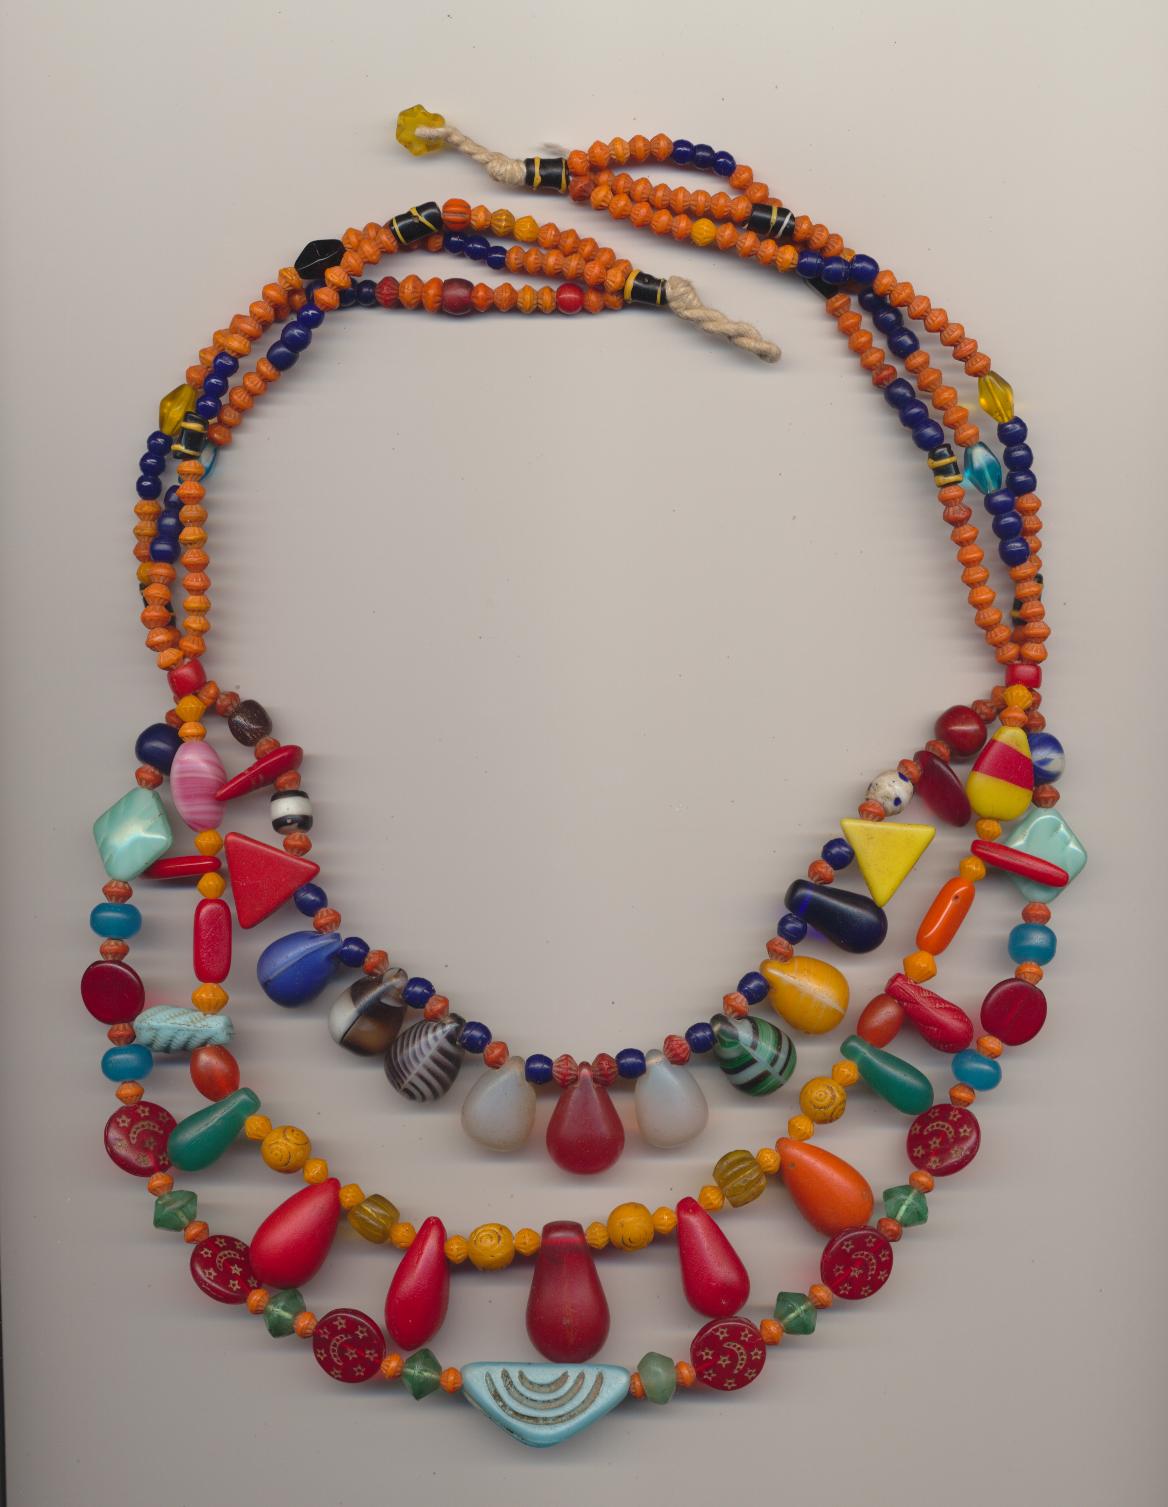 Old African Peul / Fulani wedding necklace made of Czech glass beads including imitation half Mpande conus disc, and Venetian glass trade beads, 1930's, length inner row 21'' 53cm., middle row 23'' 58cm., outer row 27'' 68cm.